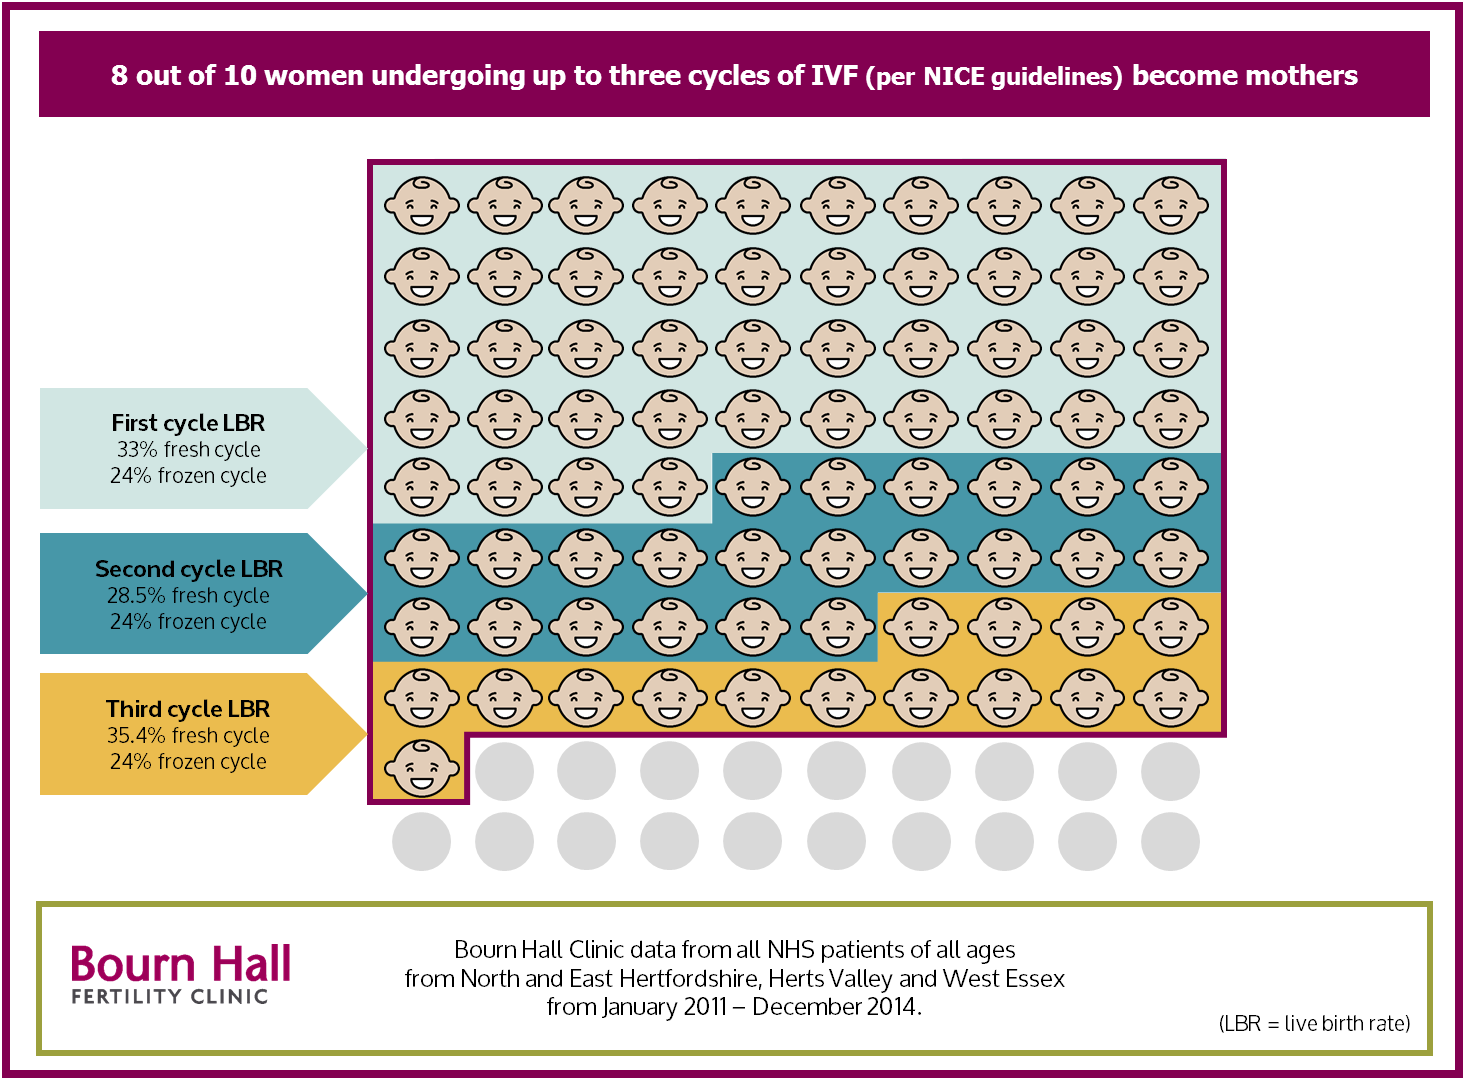 8 out of 10 Herts IVF patients have a baby within 3 IVF cycles